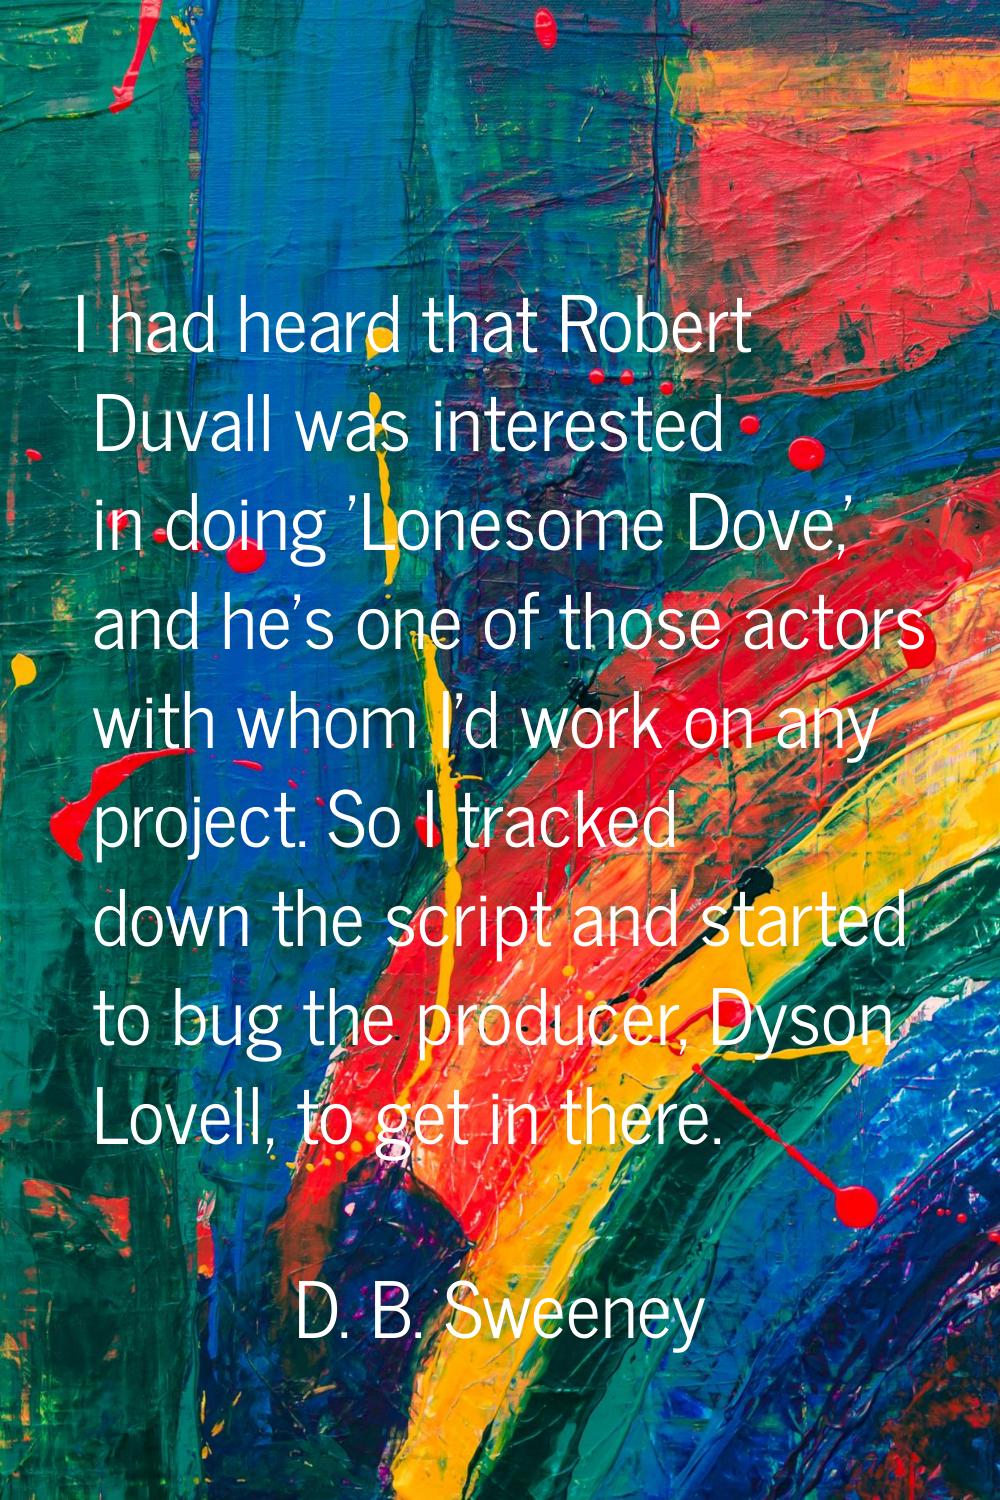 I had heard that Robert Duvall was interested in doing 'Lonesome Dove,' and he's one of those actor